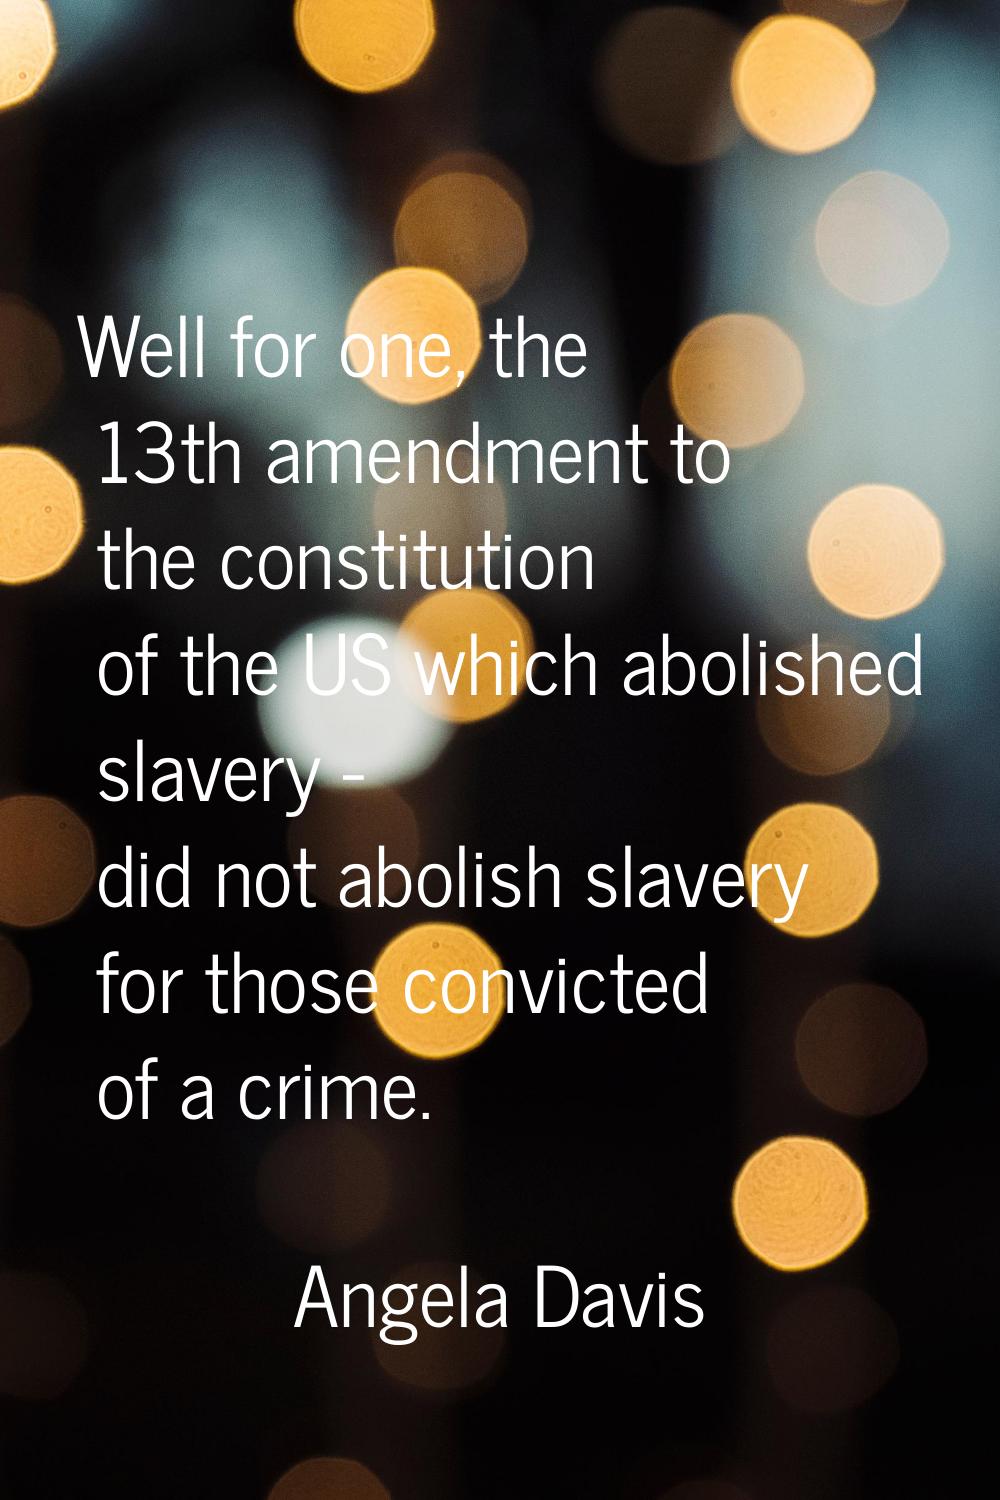 Well for one, the 13th amendment to the constitution of the US which abolished slavery - did not ab